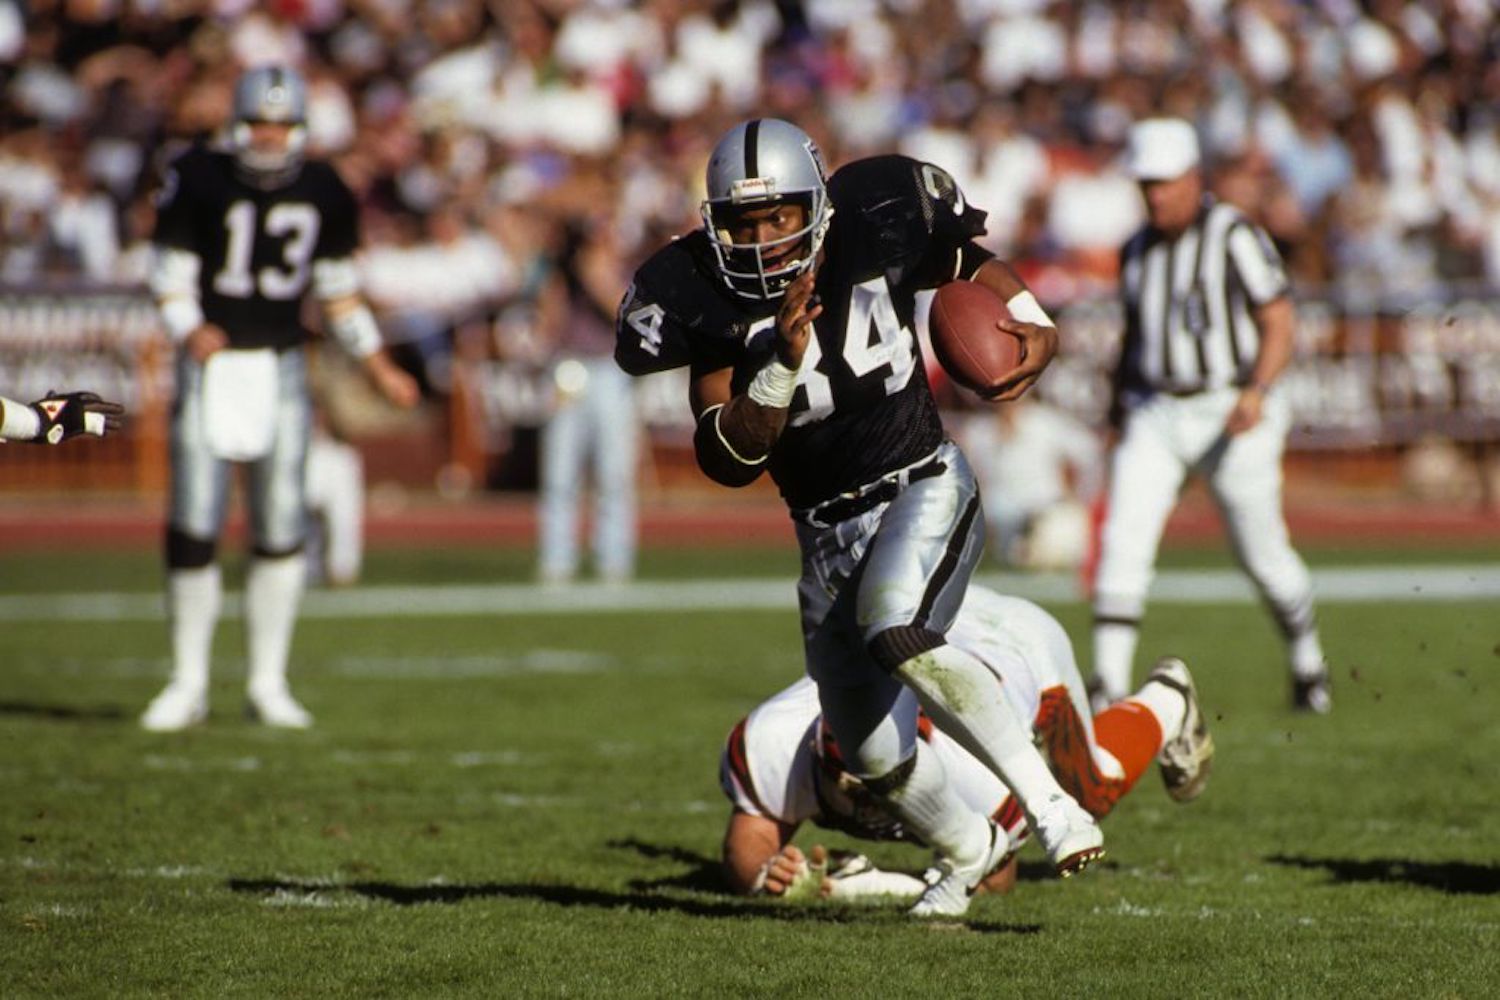 Bo Jackson Says He Would Dominate Today’s NFL: ‘I’d Probably be Averaging 350-400 Yards a Game’